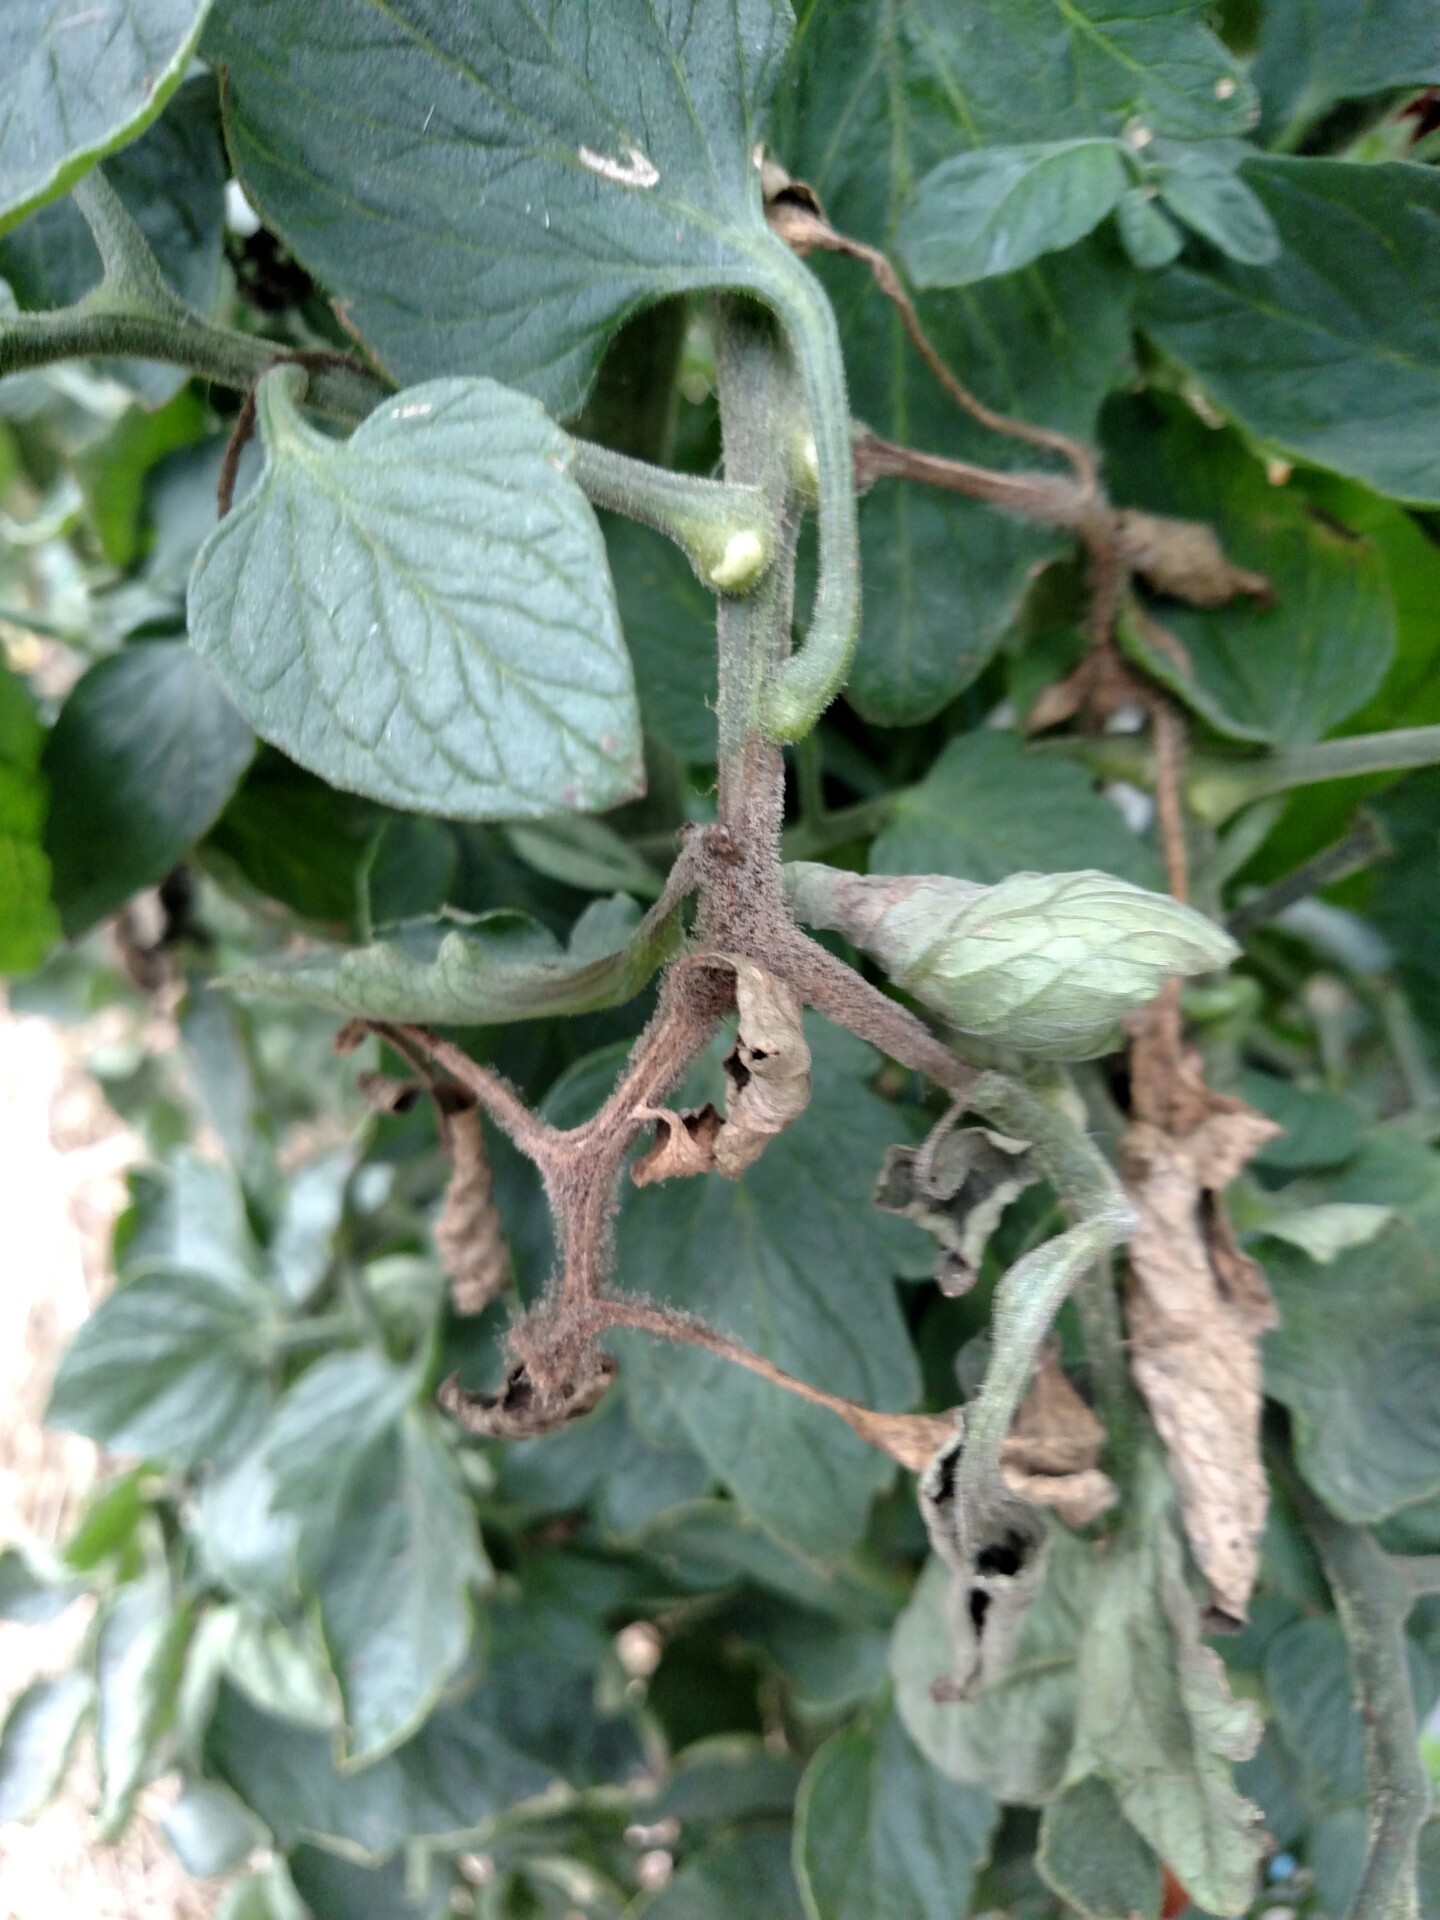 Figure 1. The fungus that causes gray mold often sporulates on infected tomato stems.